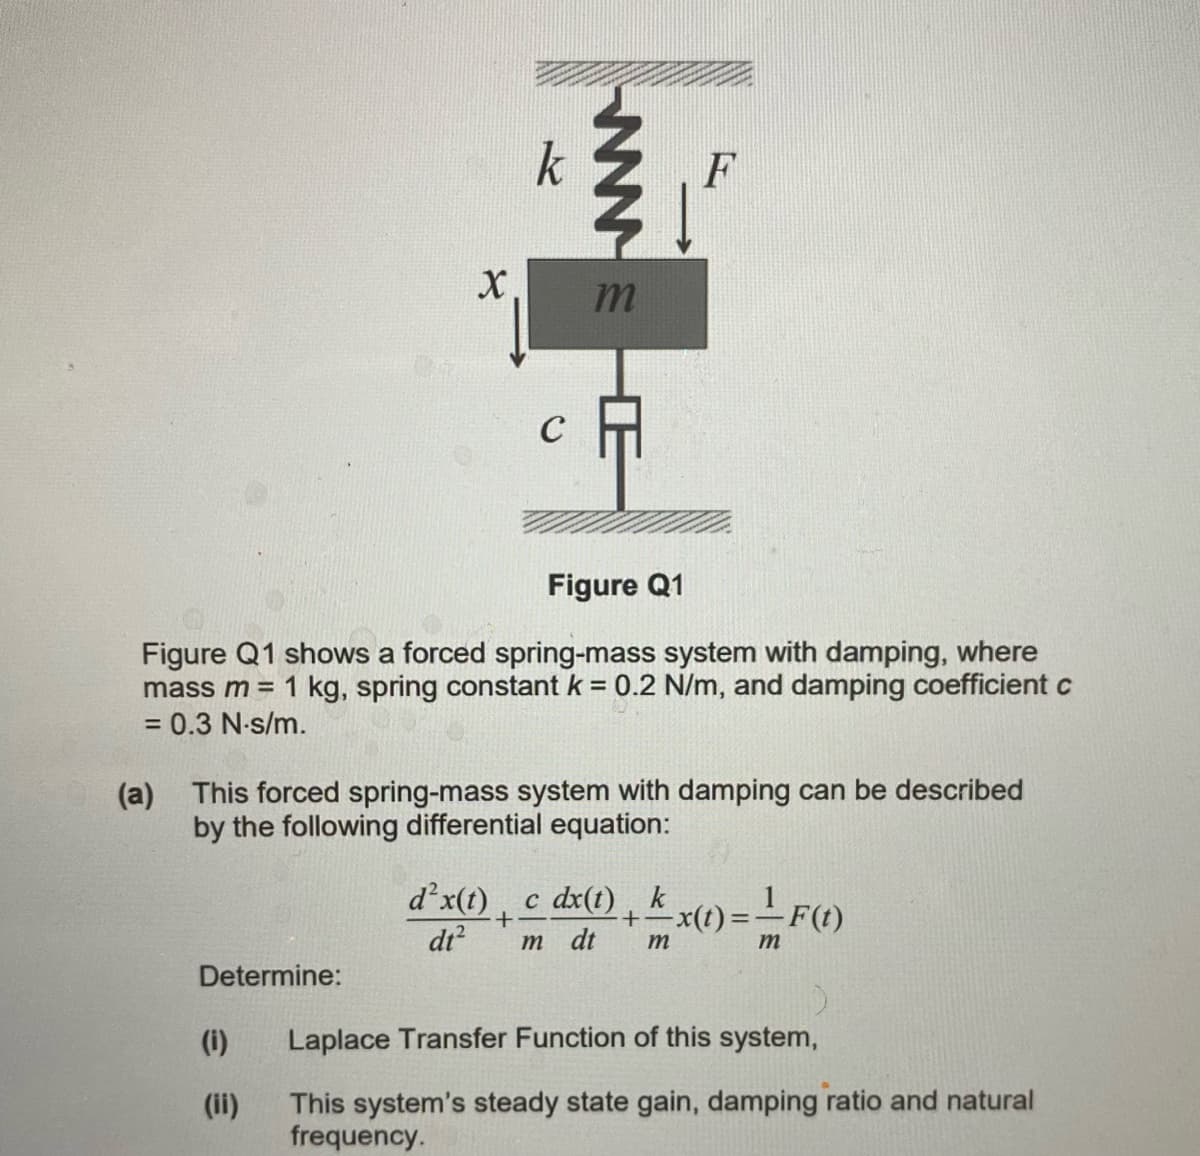 k
F
X
m
(a)
Figure Q1
Figure Q1 shows a forced spring-mass system with damping, where
mass m = 1 kg, spring constant k = 0.2 N/m, and damping coefficient c
= 0.3 N-s/m.
This forced spring-mass system with damping can be described
by the following differential equation:
dx(t) c dx(t), k
+
+.
m dt m
x(t) = F(1)
m
dt²
Determine:
(i)
Laplace Transfer Function of this system,
(ii)
This system's steady state gain, damping ratio and natural
frequency.